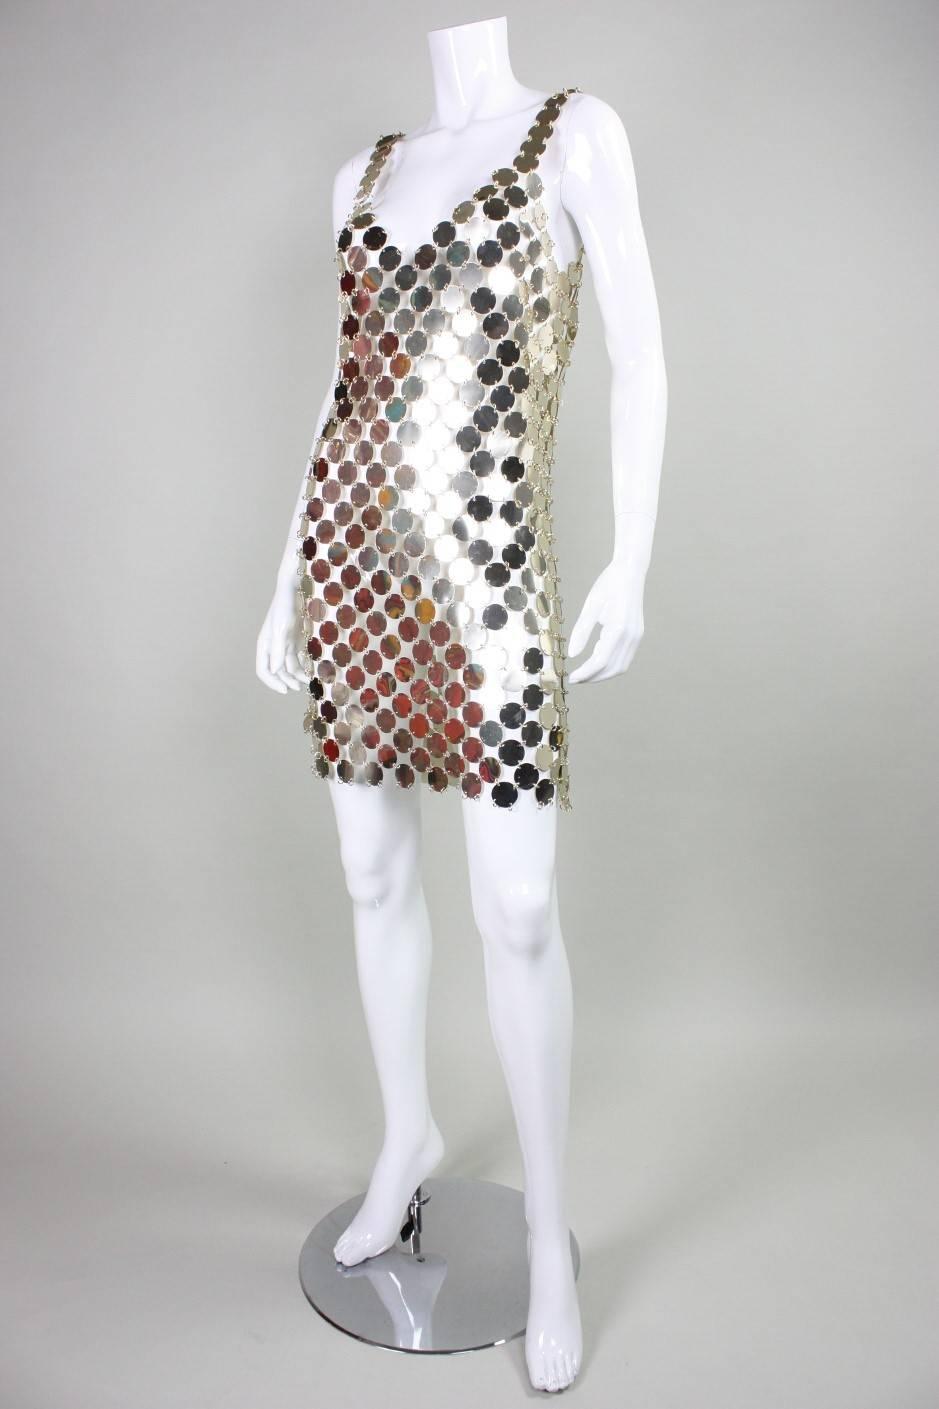 Vintage dress dates to 1996 and was made from a do it yourself dress kit by Paco Rabanne.  It is made entirely of silver-toned lightweight metal discs with gold-toned o-ring connectors.  No closures.  Unlined.

No size label, but it would fit a